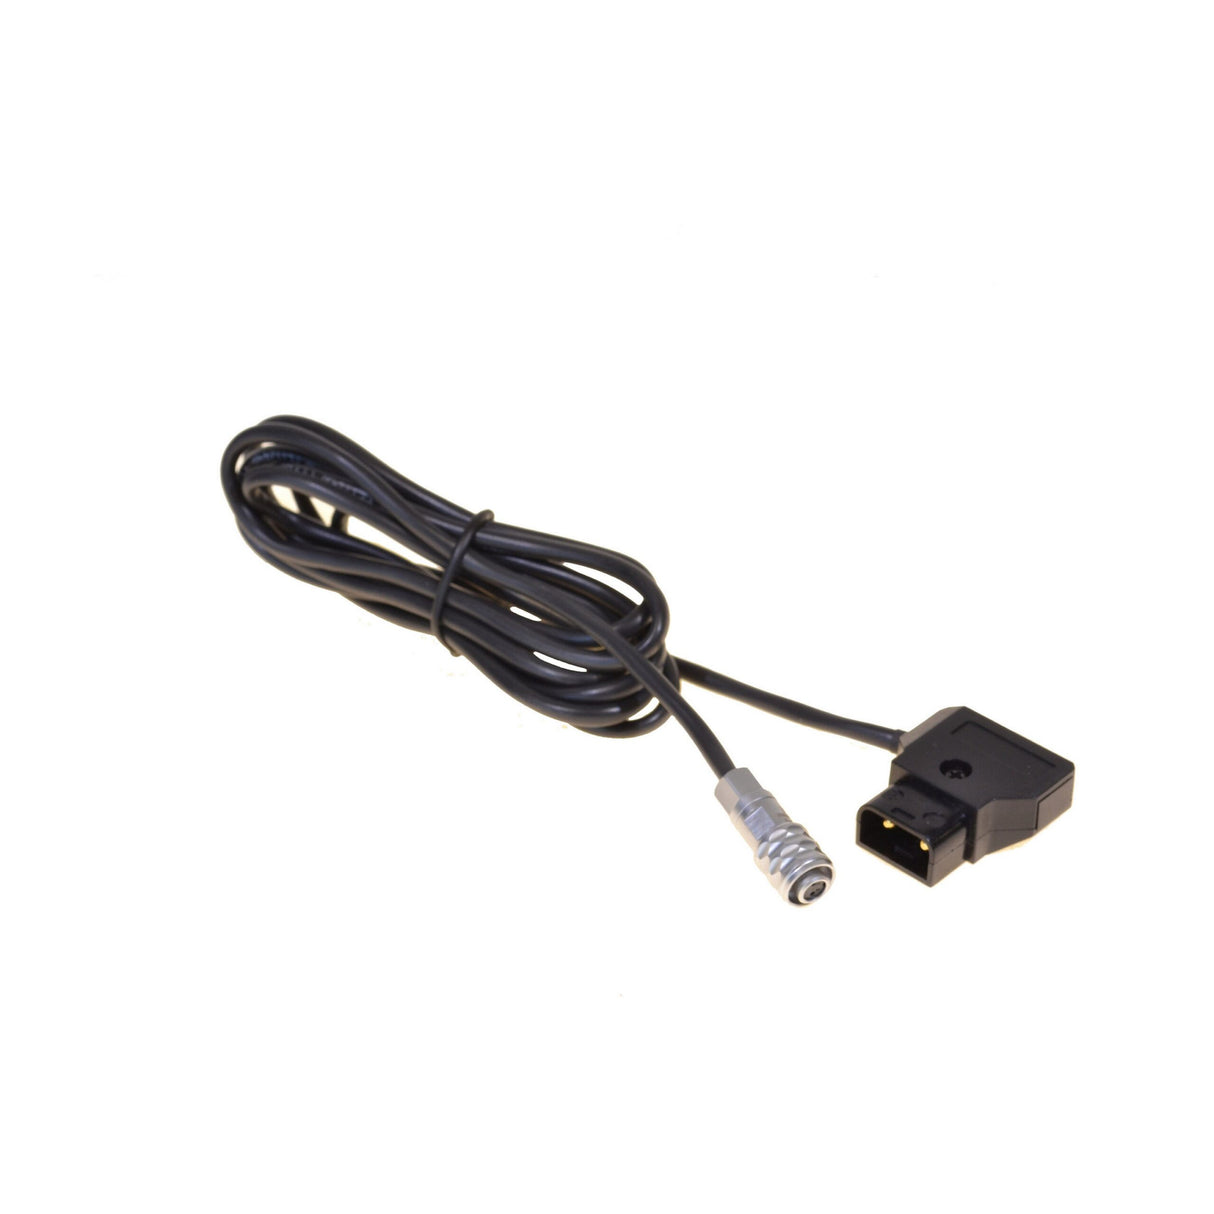 Bescor BMADT5 D-Tap Male to Black Magic Pocket 4K Cord, 5 Foot